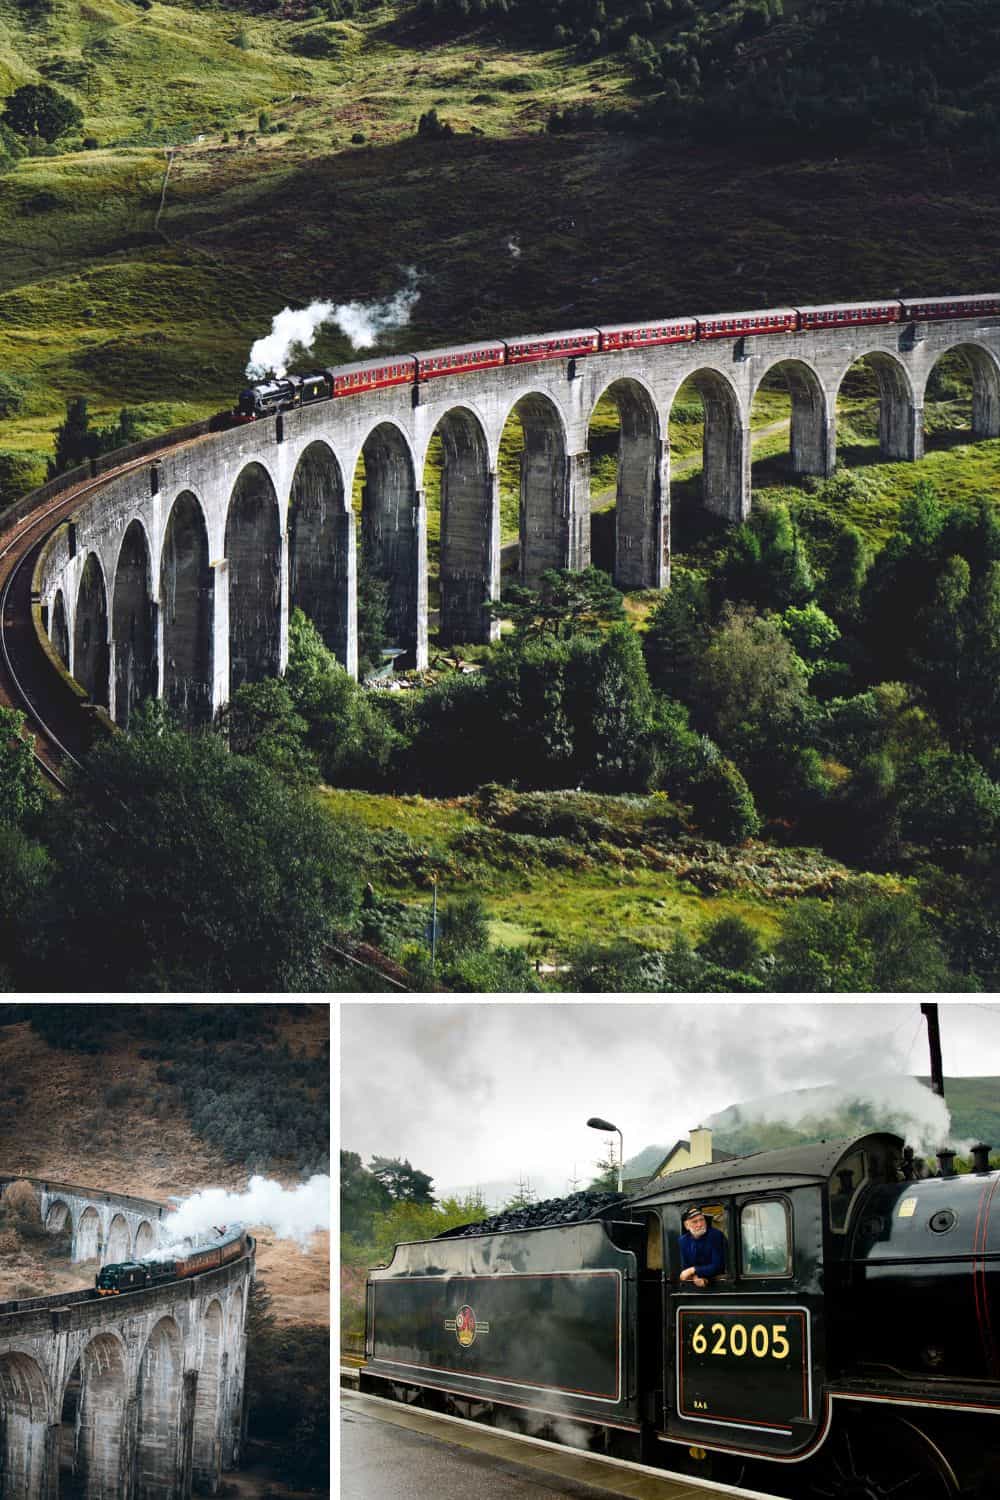 Hogwarts Express from Harry Potter films in Scotland